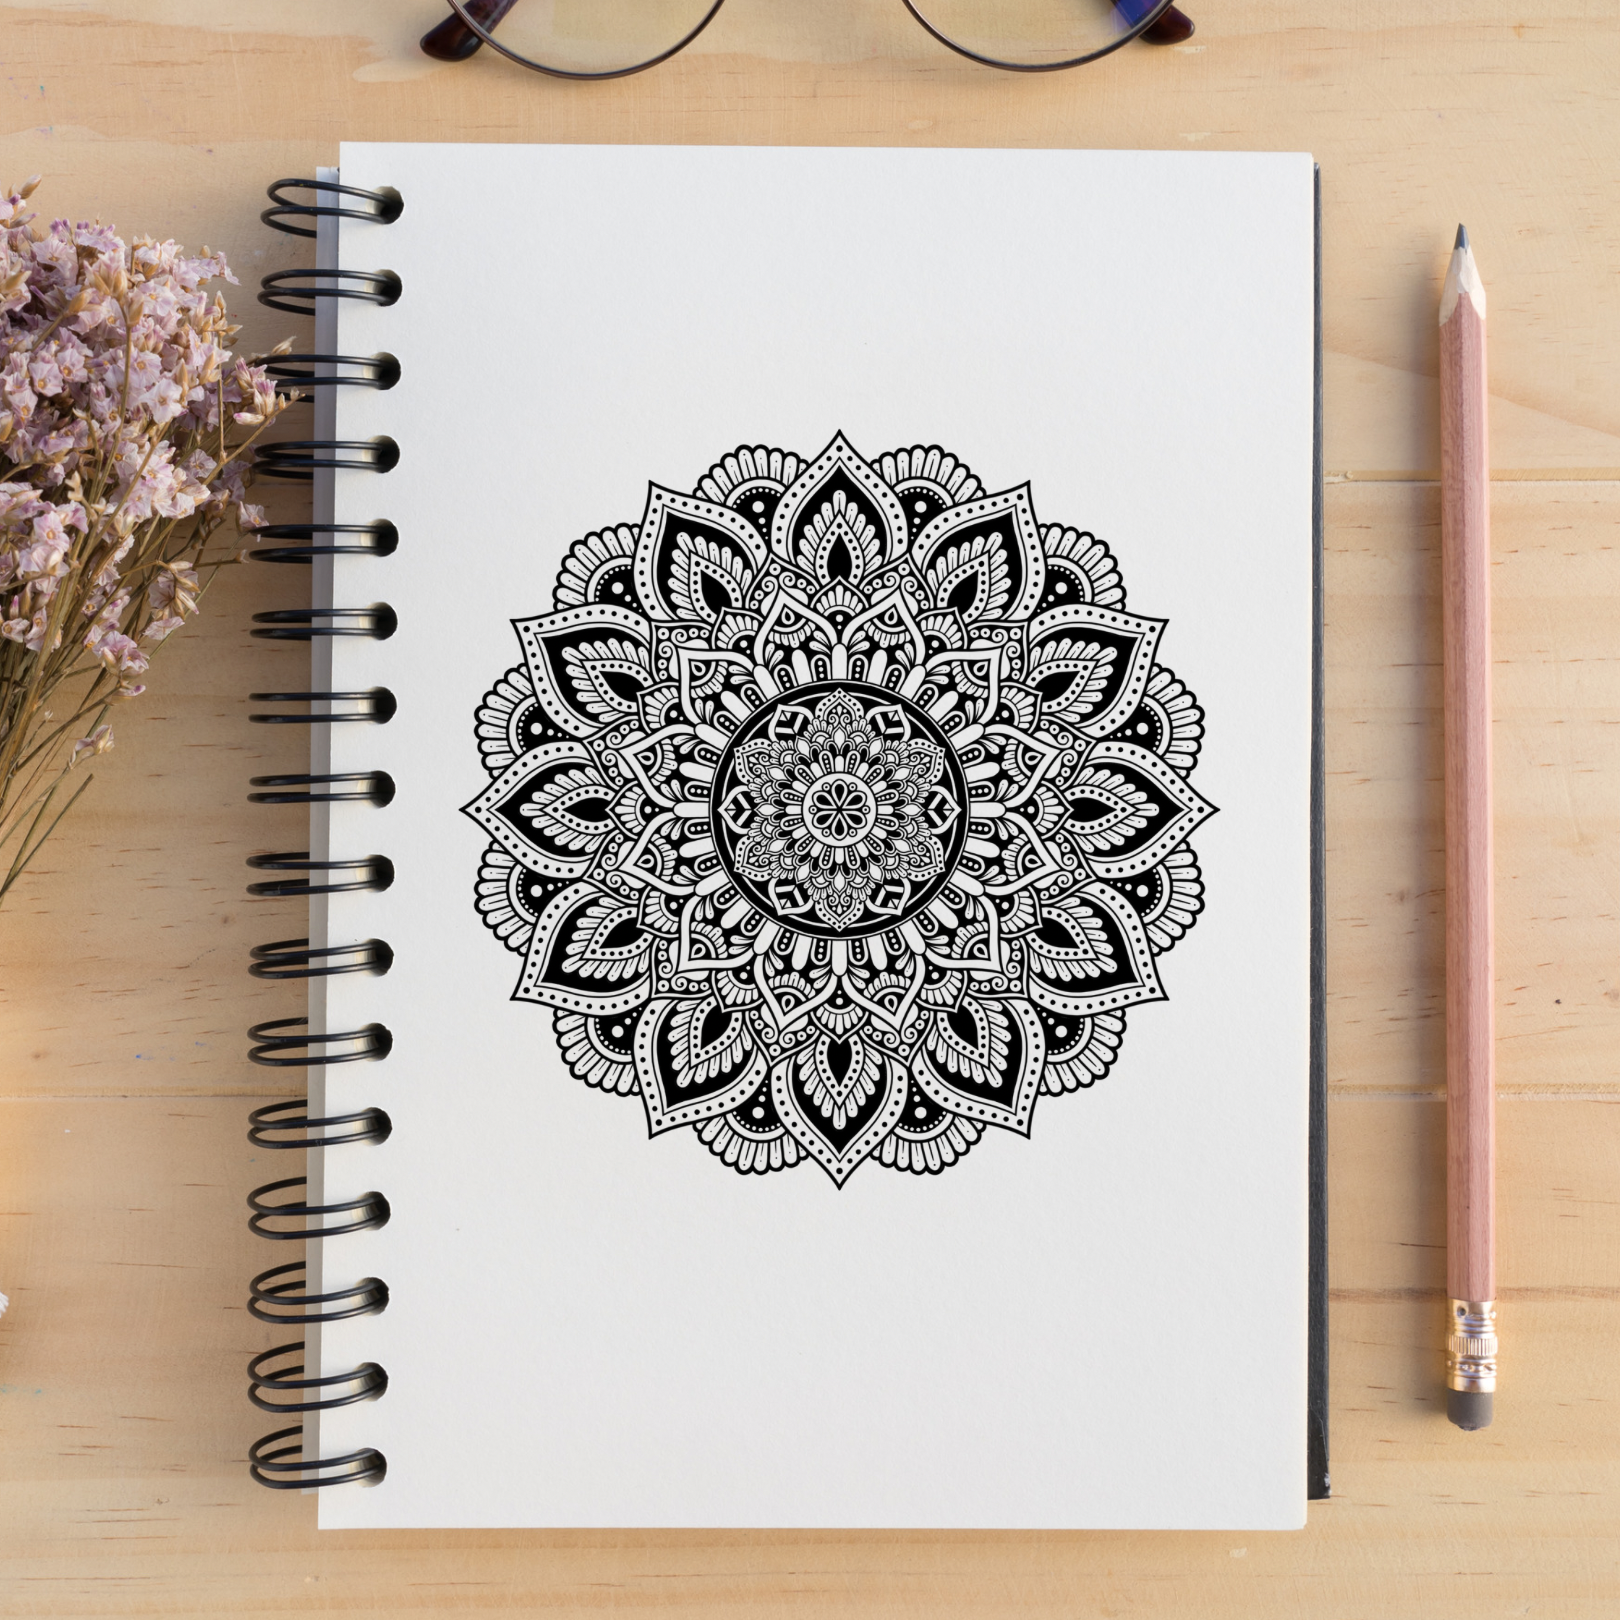 Design Stack: A Blog about Art, Design and Architecture: Intricate and  Creative Mandala Designs